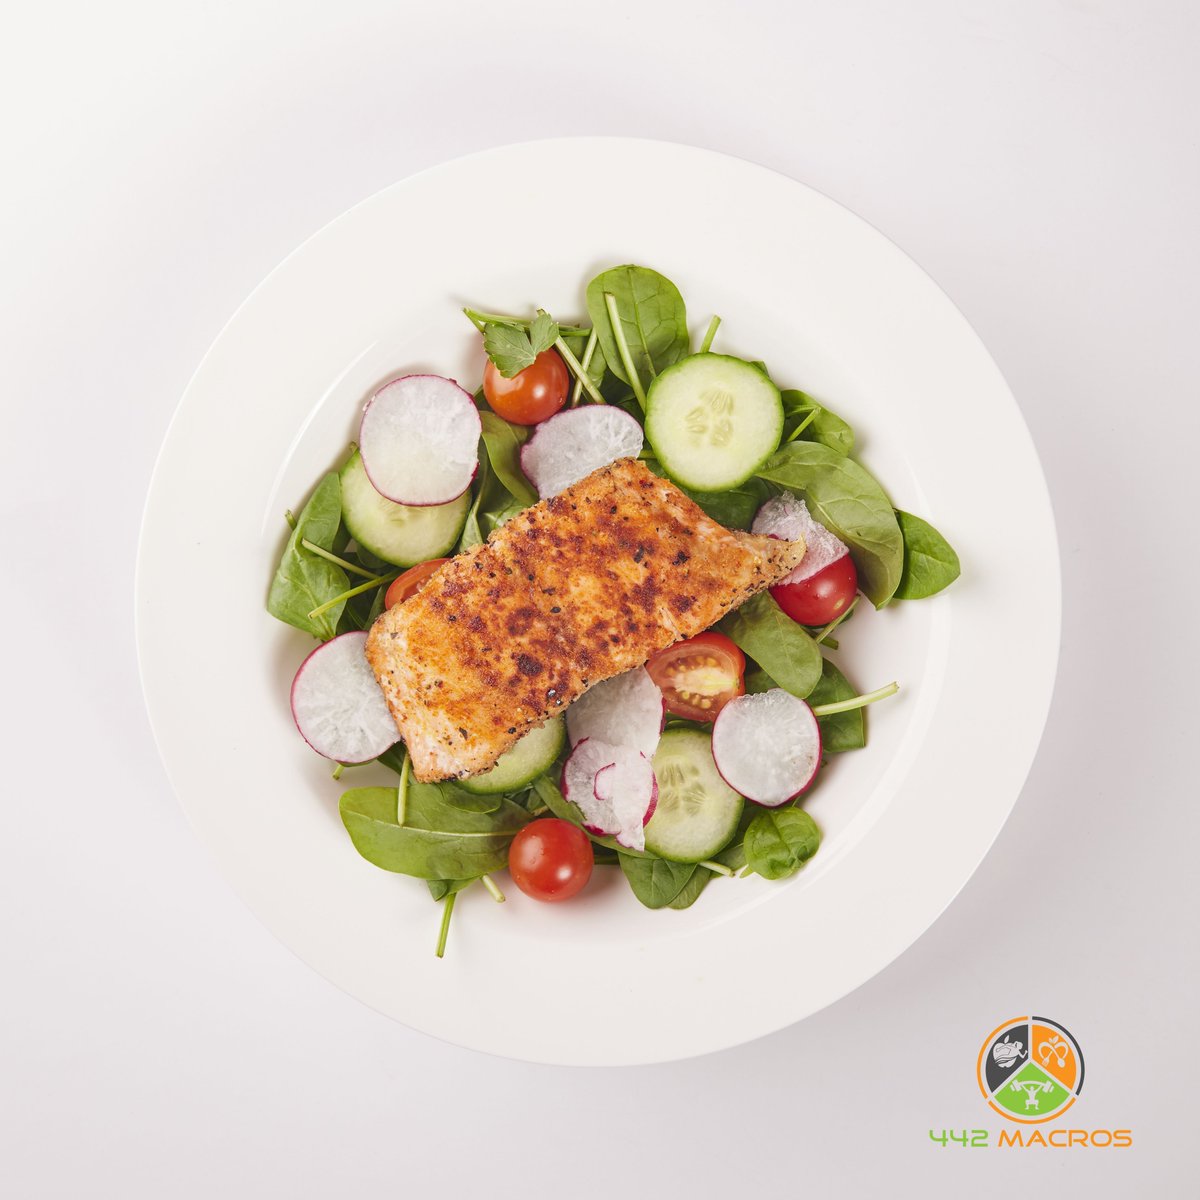 Have you thought about what you're having for lunch yet?
Call us!
#442macros #mealprep #bodyrecomposition #weightloss #lunchgoals #healthyliving